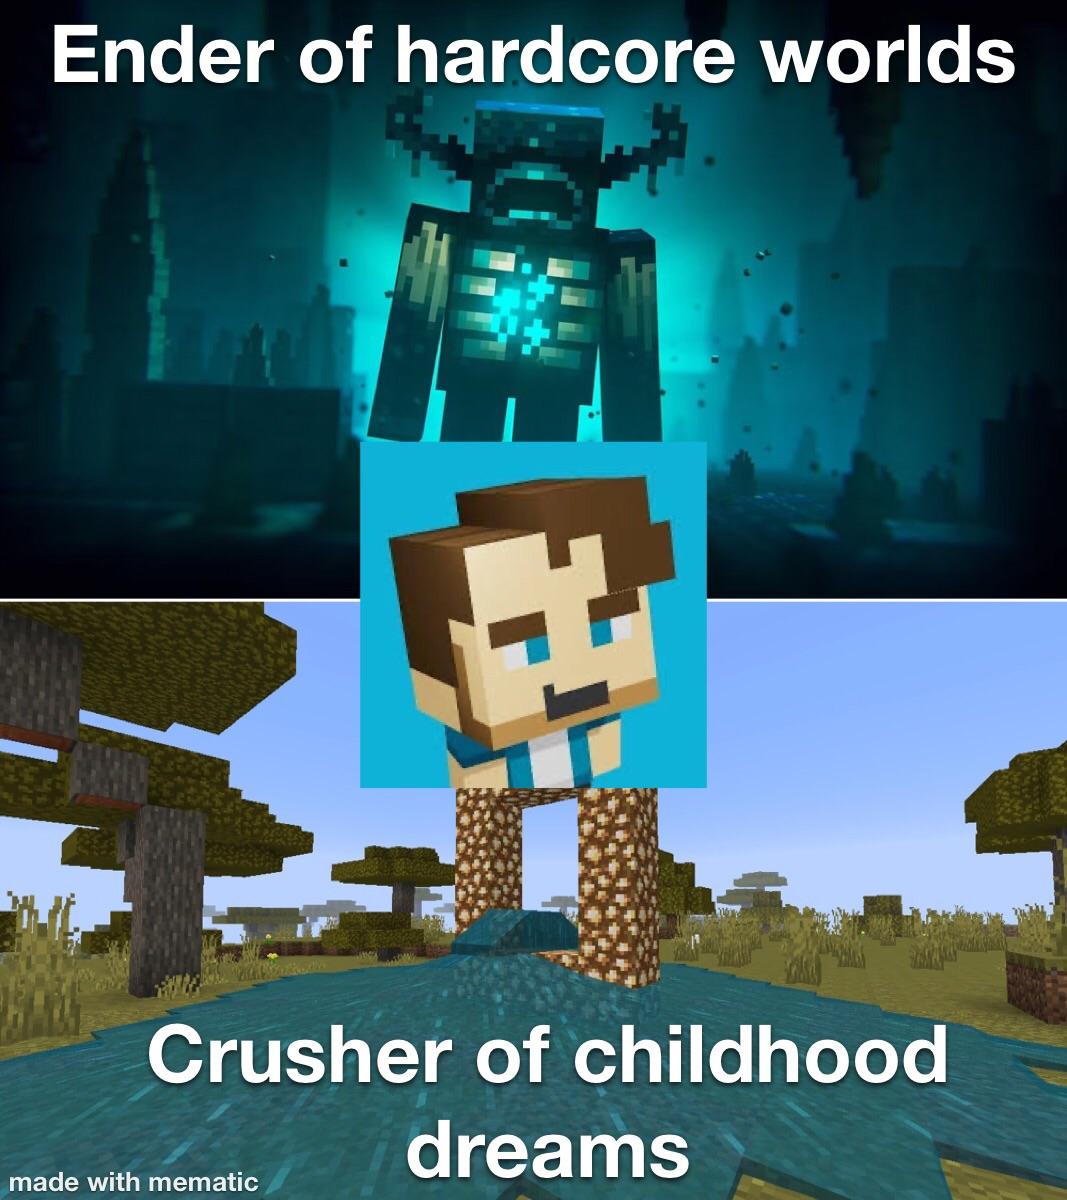 Minecraft Memes - Based off of u/qwertyjgly comment